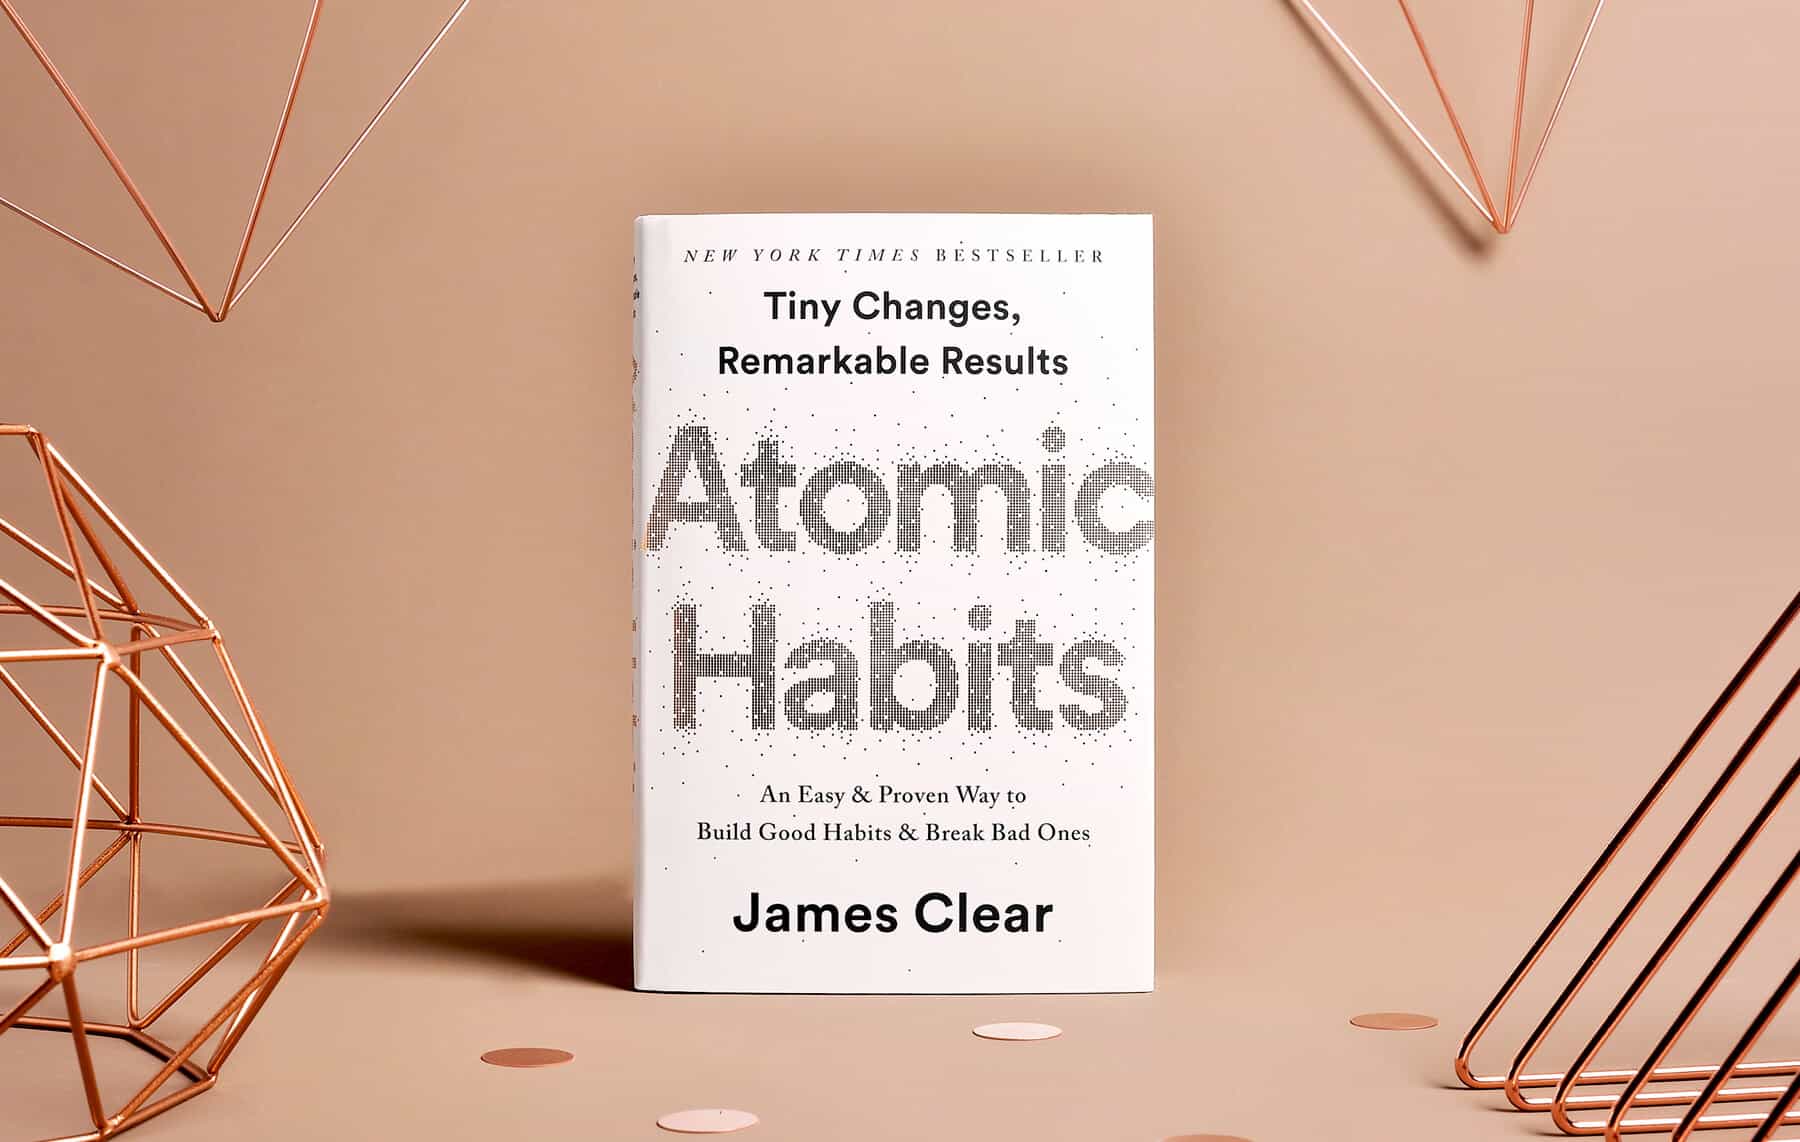 How Consultants Can Use Atomic Habits To Radically Improve Their Business